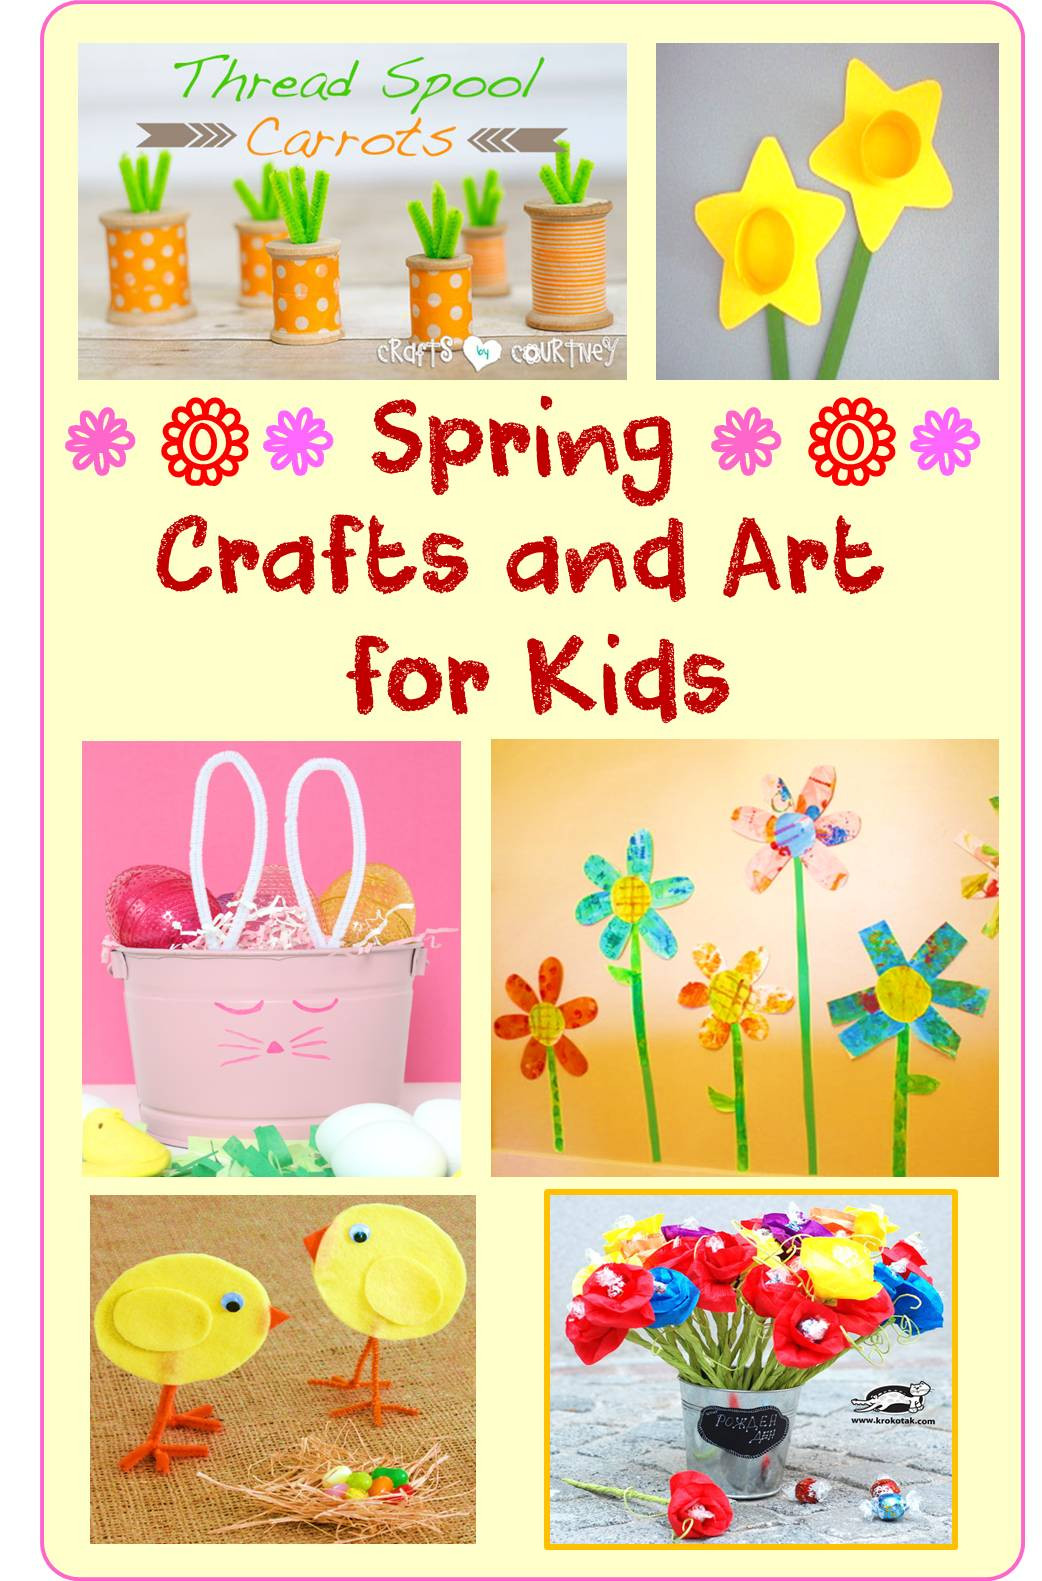 Spring Arts And Crafts For Kids
 Spring Crafts and Art for Kids